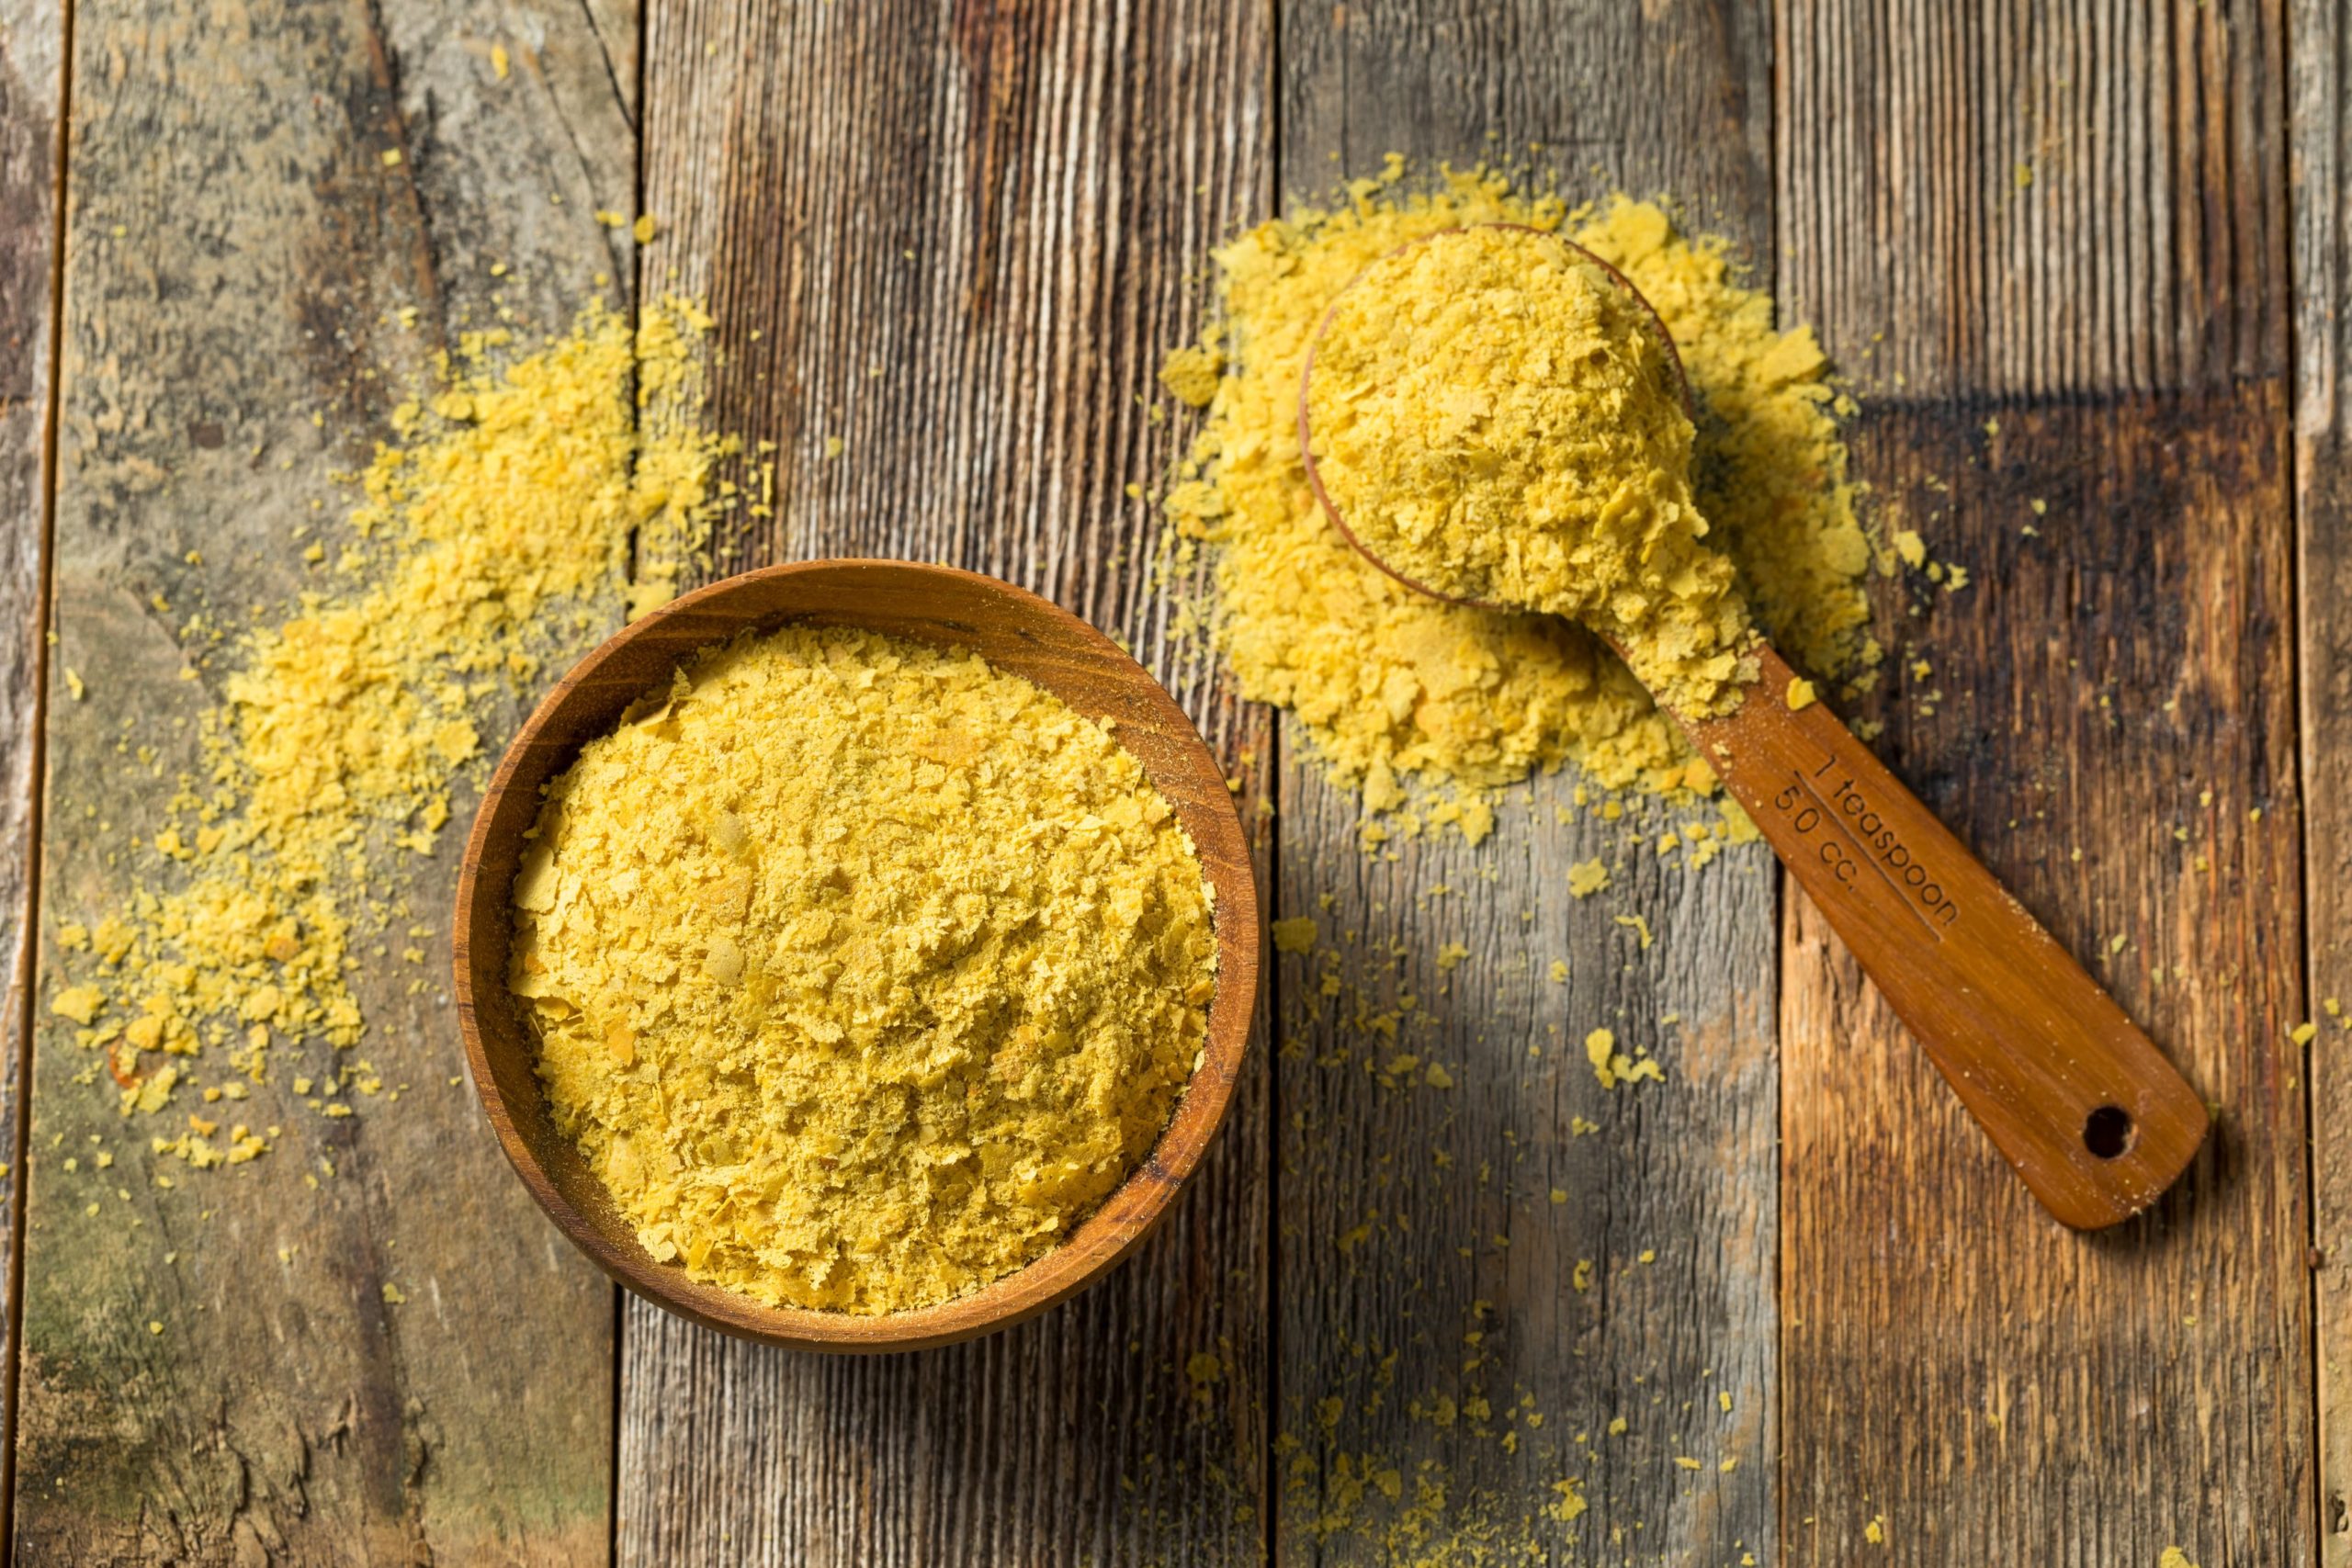 Nutritional Yeast or Nooch